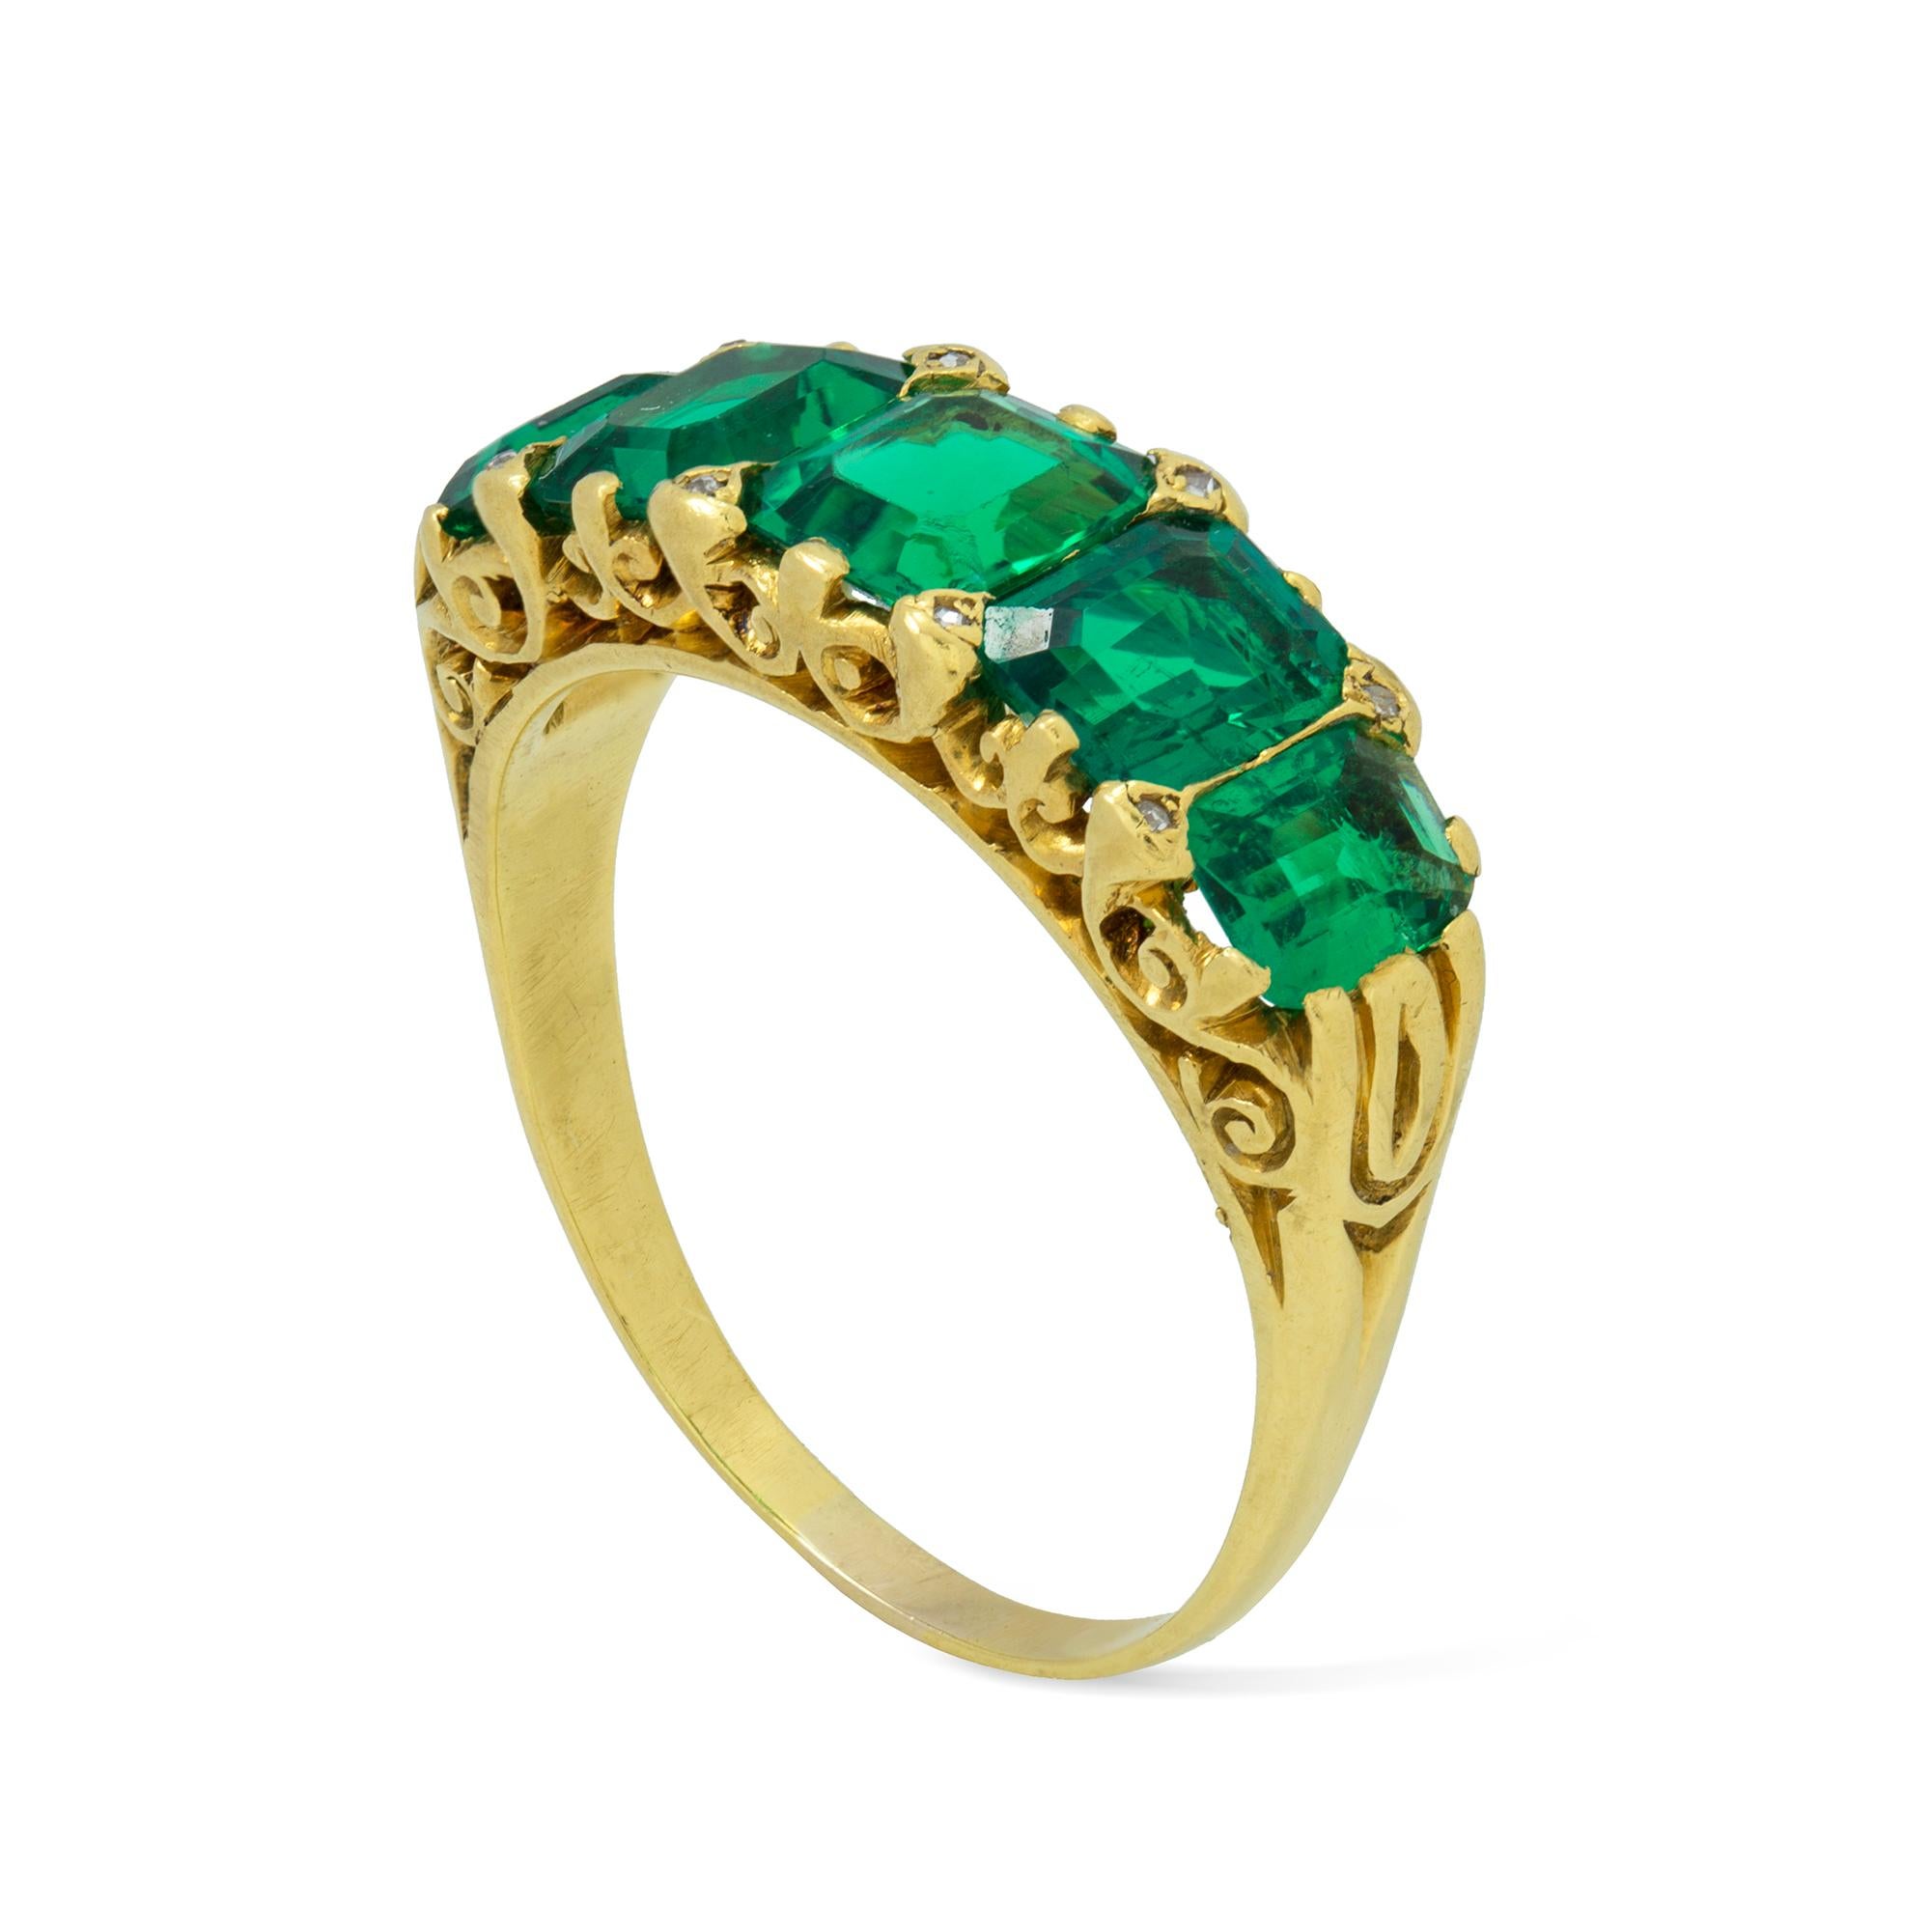 An Important Victorian five-stone emerald ring, the five emerald-cut emeralds graduating from the centre and estimated to weigh a total of approximately 4 carats, accompanied by GCS Report No 78153-66 stating to be of Colombian origin with